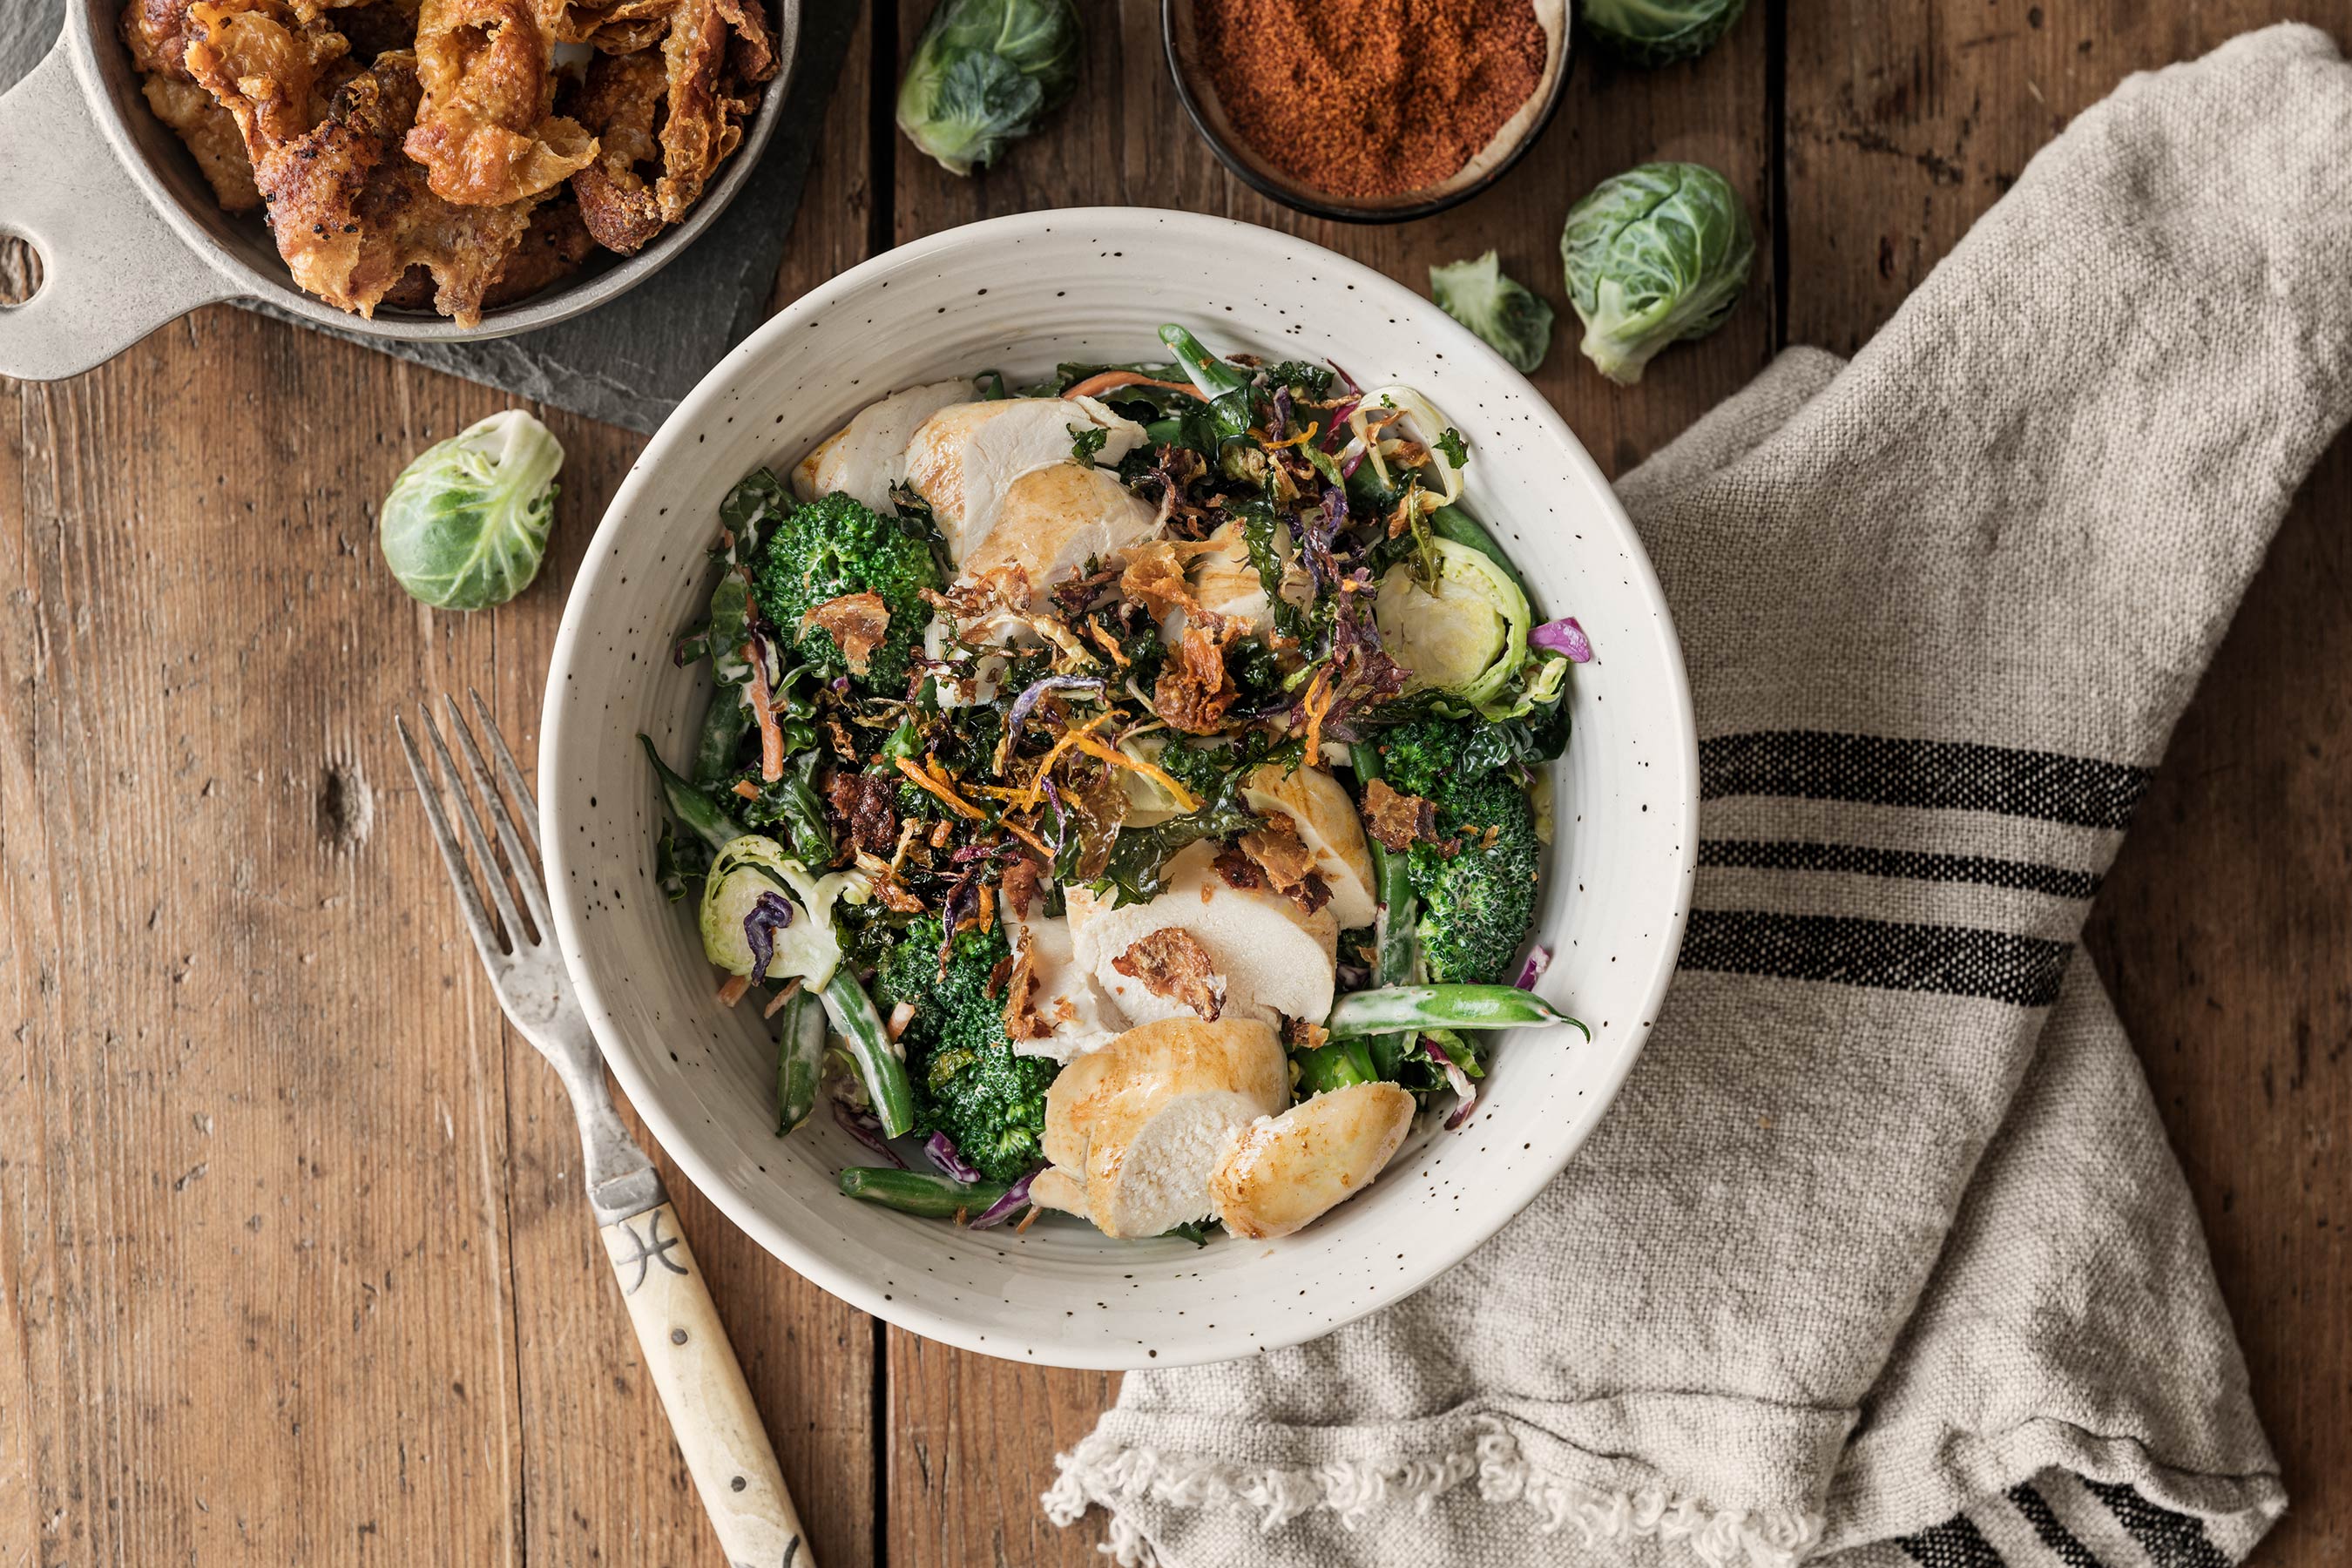 Cowboy Chicken bowl with broccoli, slaw and brussels sprouts. 